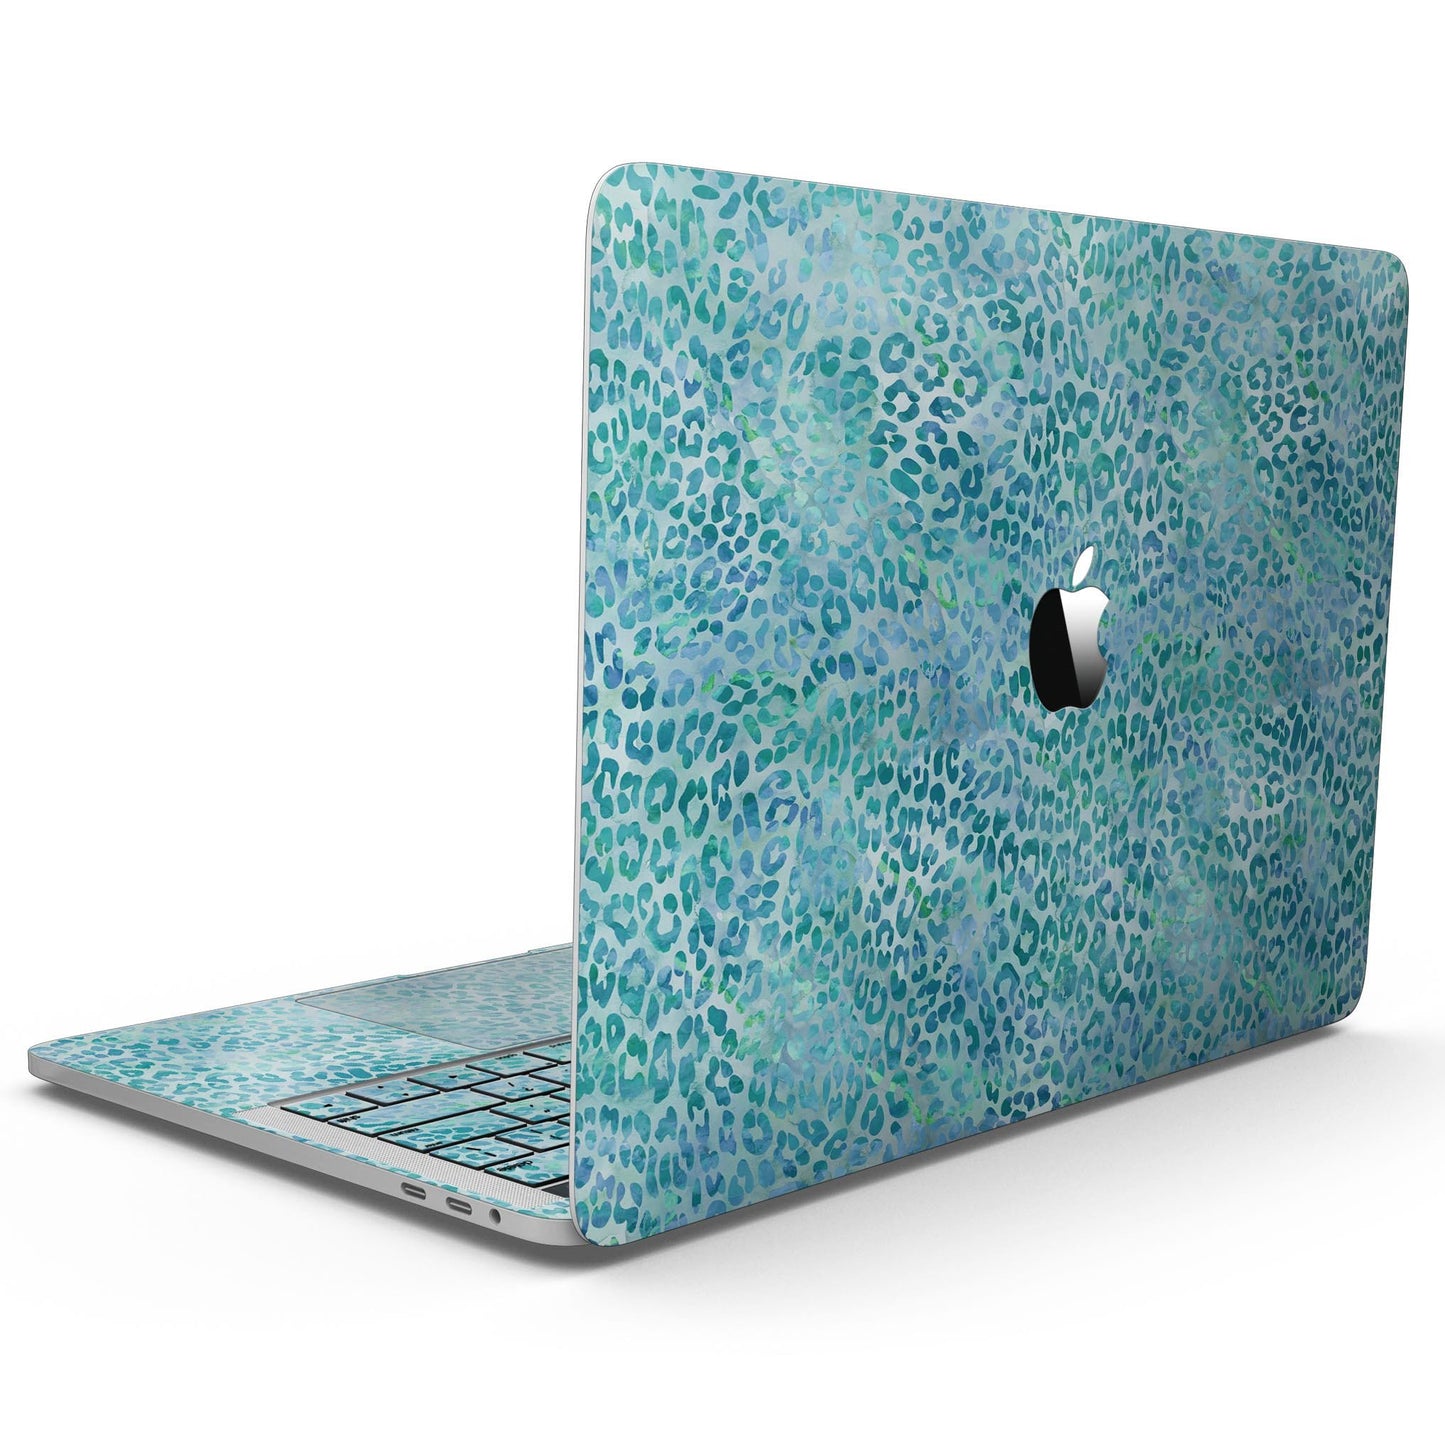 Aqua Watercolor Leopard Pattern - 13" MacBook Pro without Touch Bar